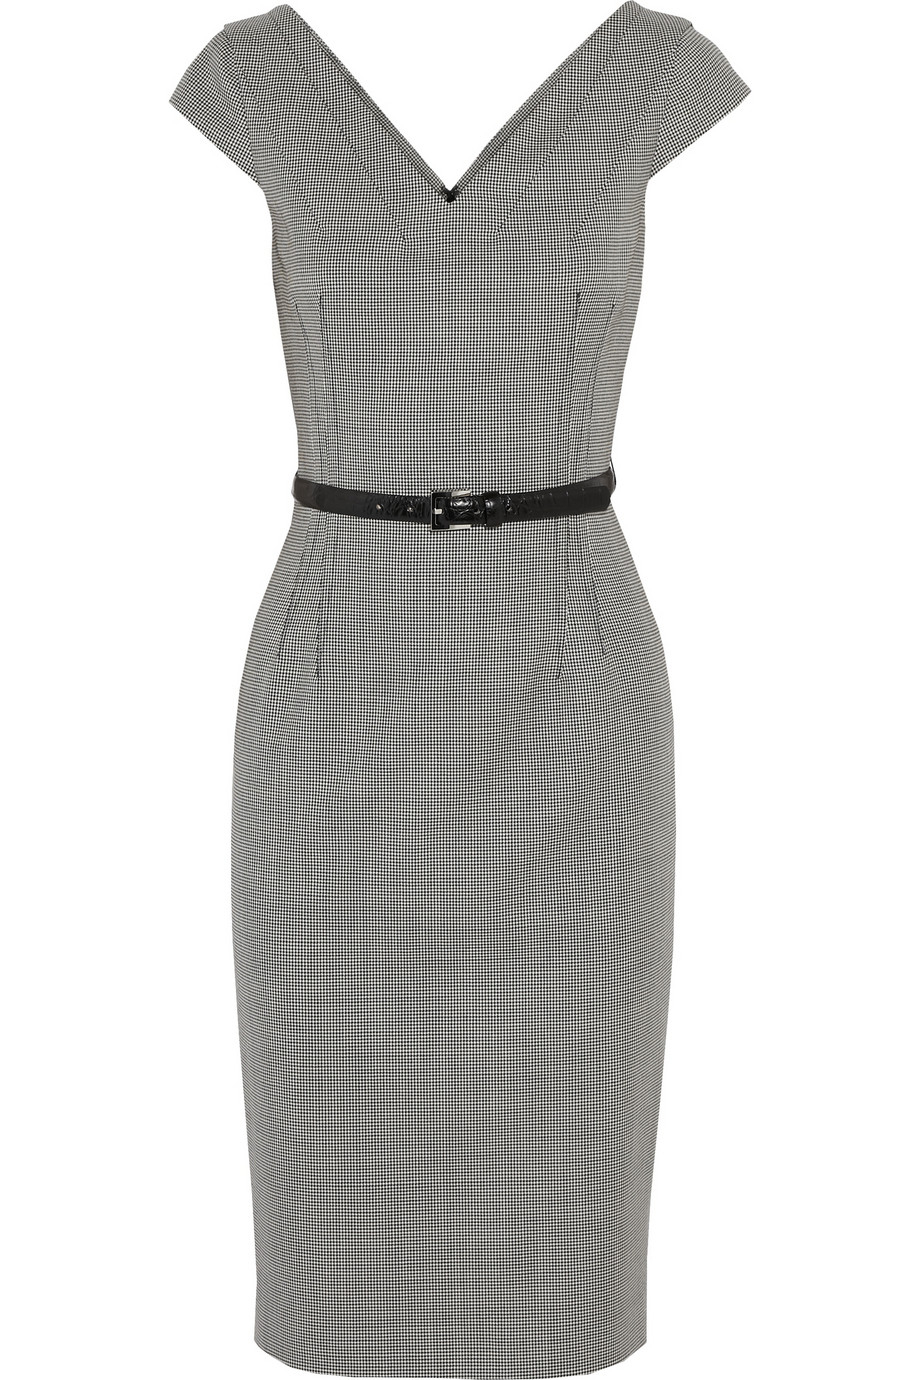 Lyst - Michael Kors Belted Houndstooth Stretch-Wool Dress in Gray